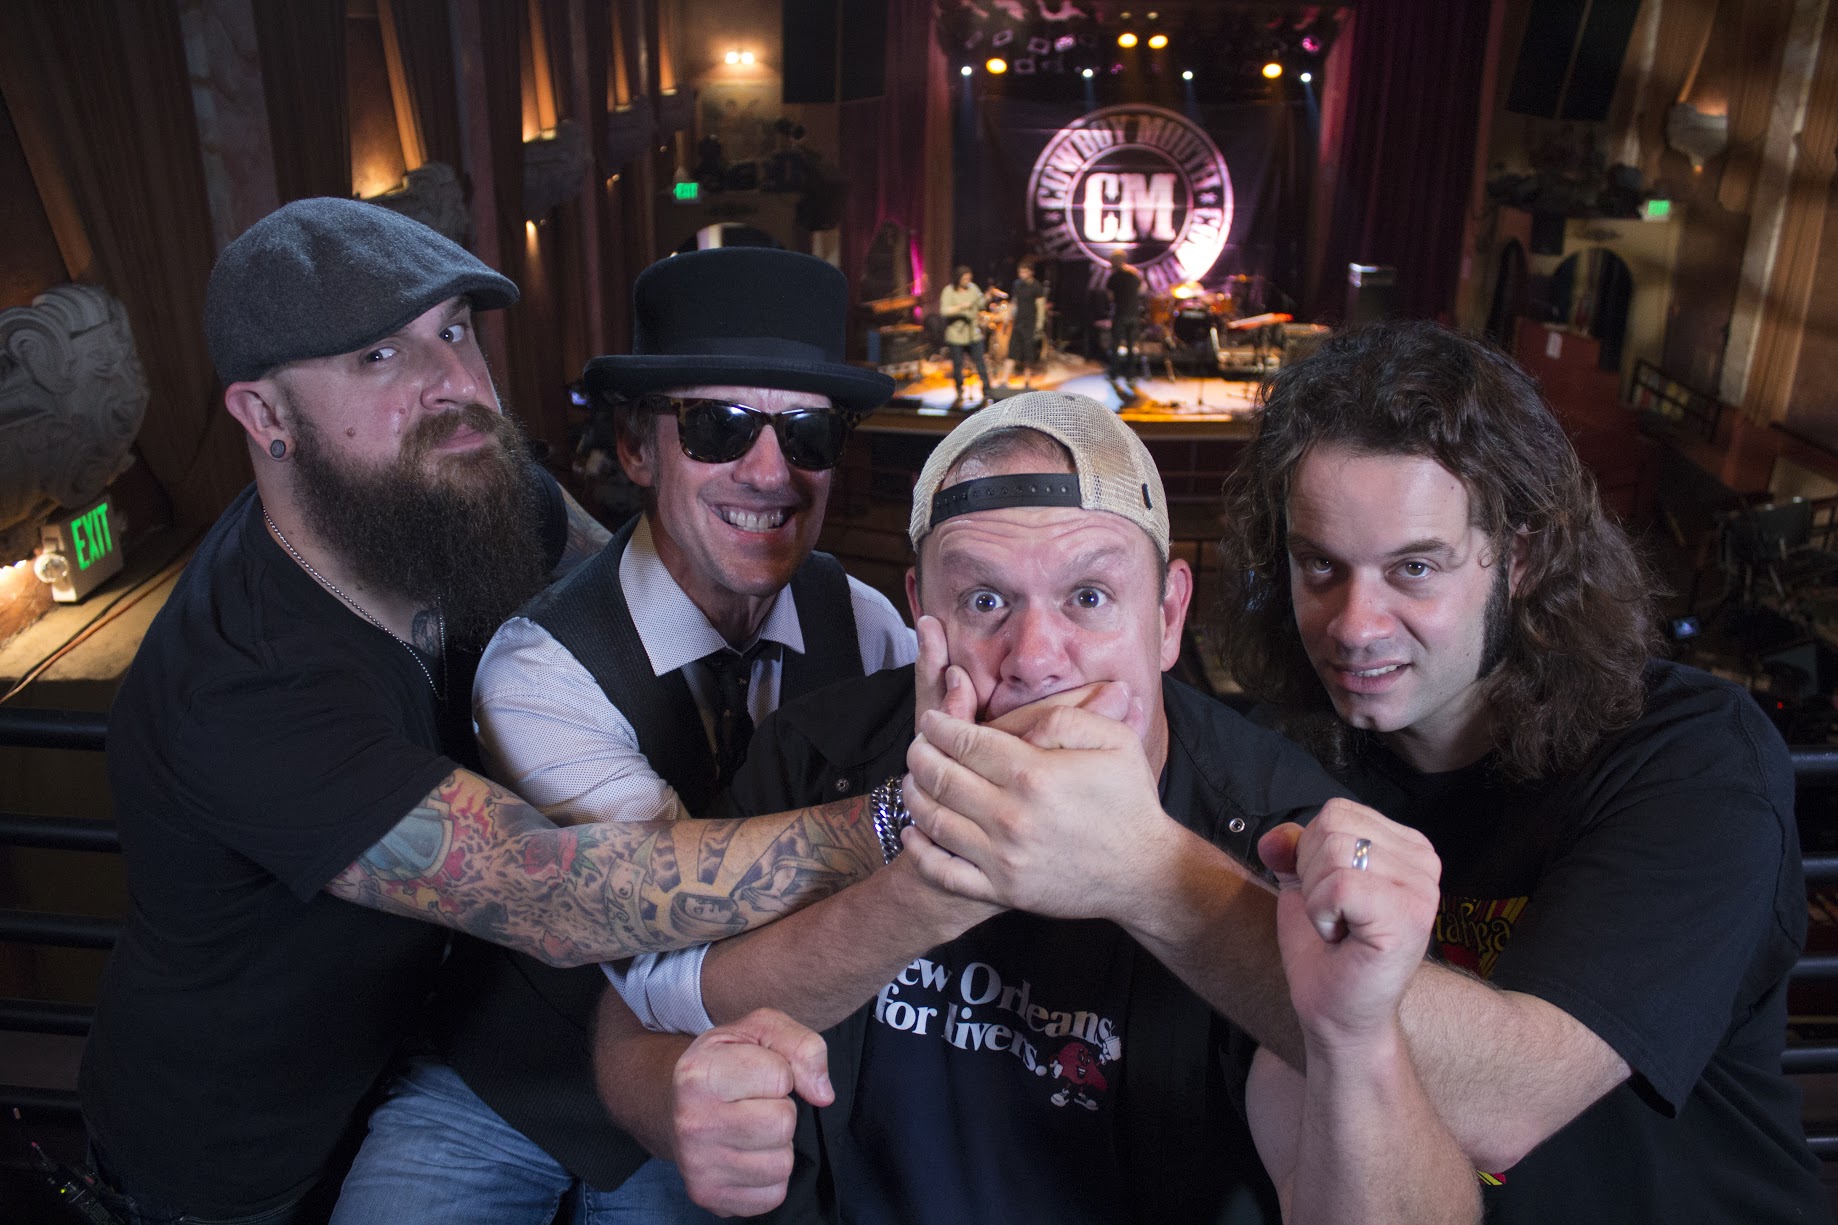 Best known for their single “Jenny Says”, Cowboy Mouth thrives on energy, that band members credit to their fans, providing listeners with an experience that can’t be compared to any other.